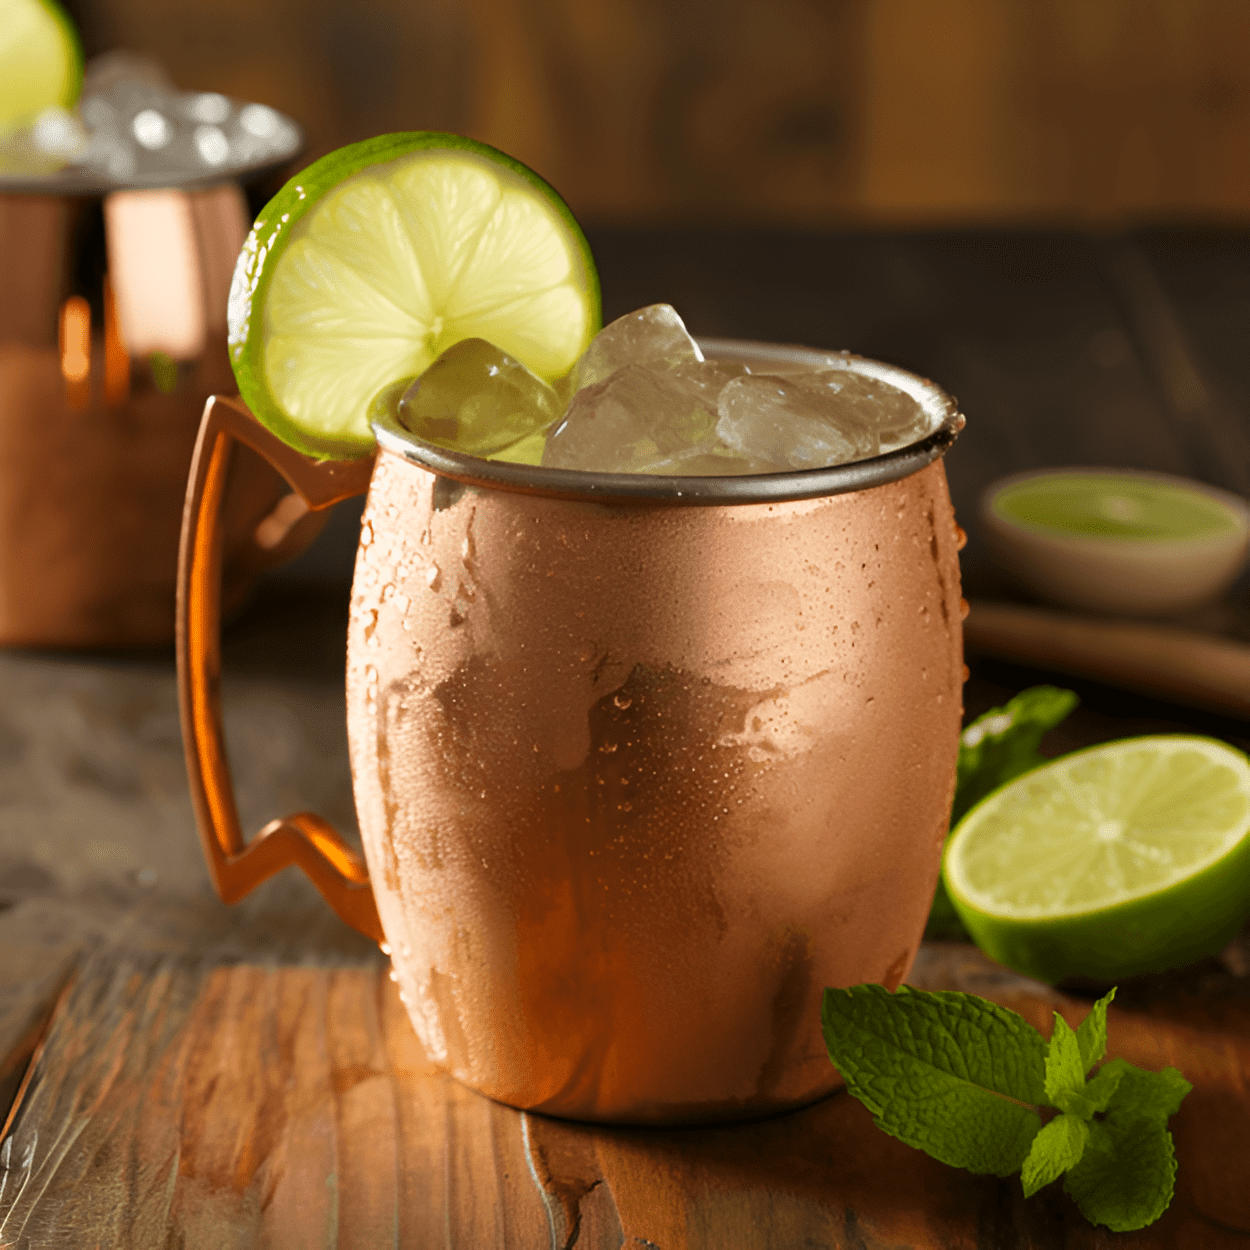 Tennessee Mule Cocktail Recipe - The Tennessee Mule is a refreshing, tangy, and slightly sweet cocktail. The whiskey gives it a strong, robust flavor, while the ginger beer adds a spicy kick. The lime juice balances out the sweetness and gives it a tart, citrusy edge.